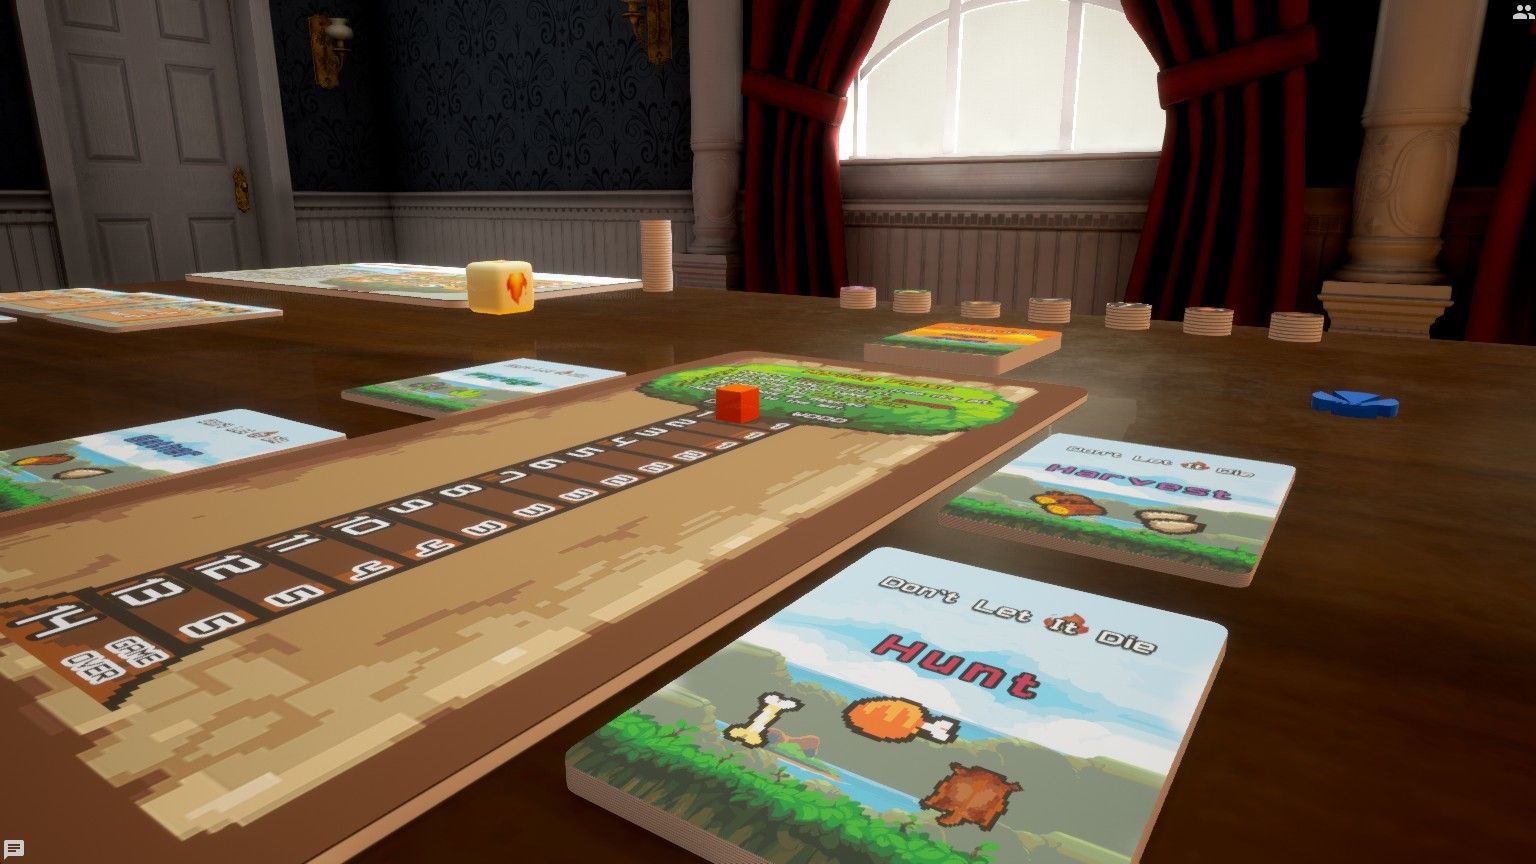 Open source physics-based tabletop sim 'Tabletop Club' gets an official  release